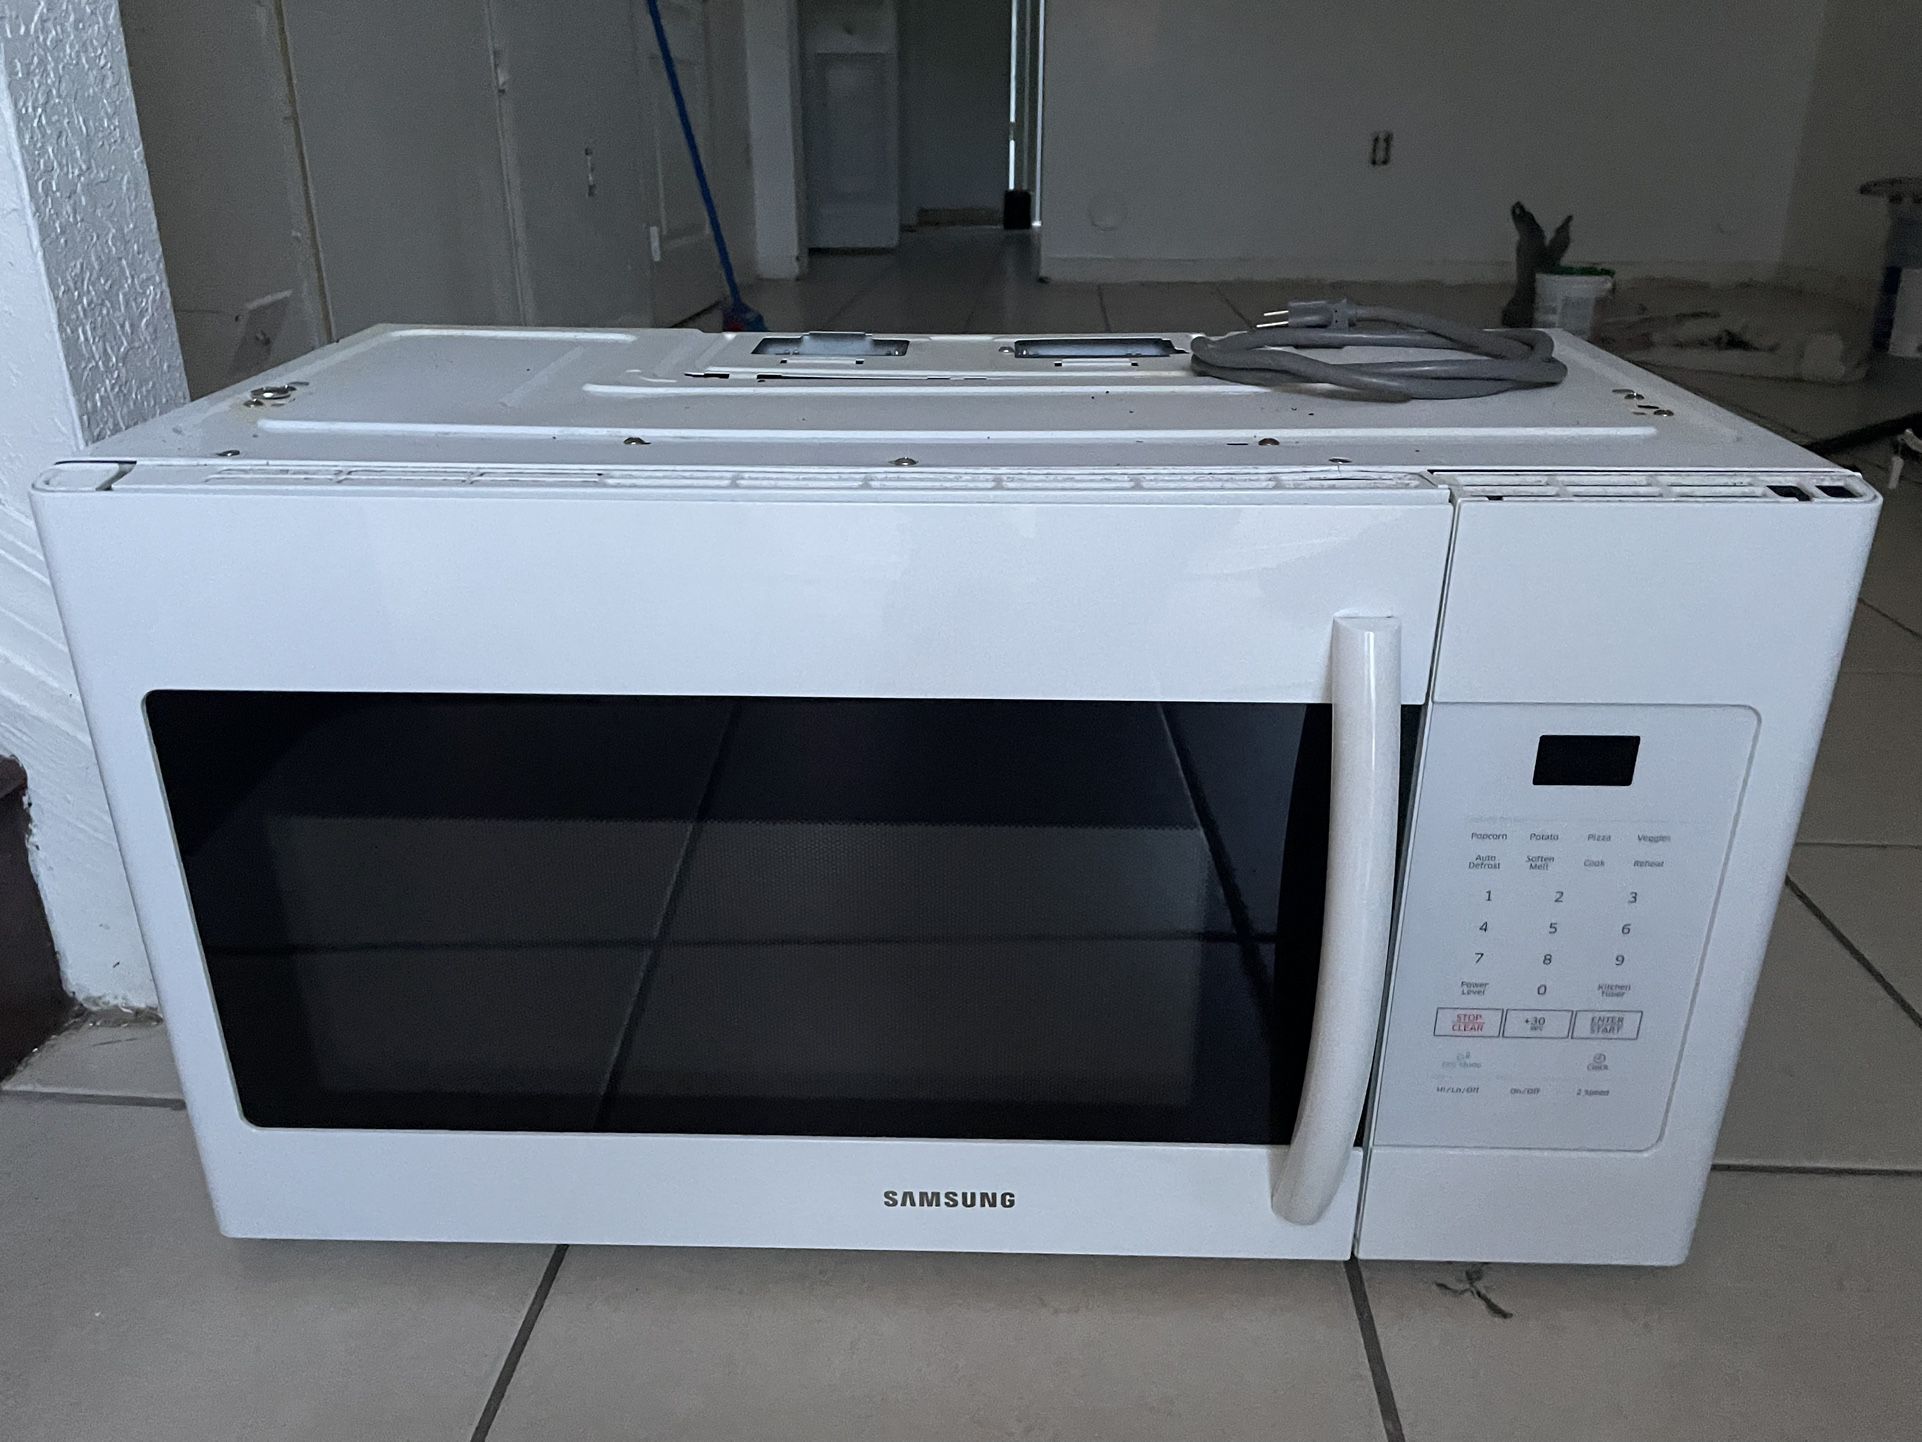 Samsung Microwave Over The Range Microwave With Sensor Cooking Controls